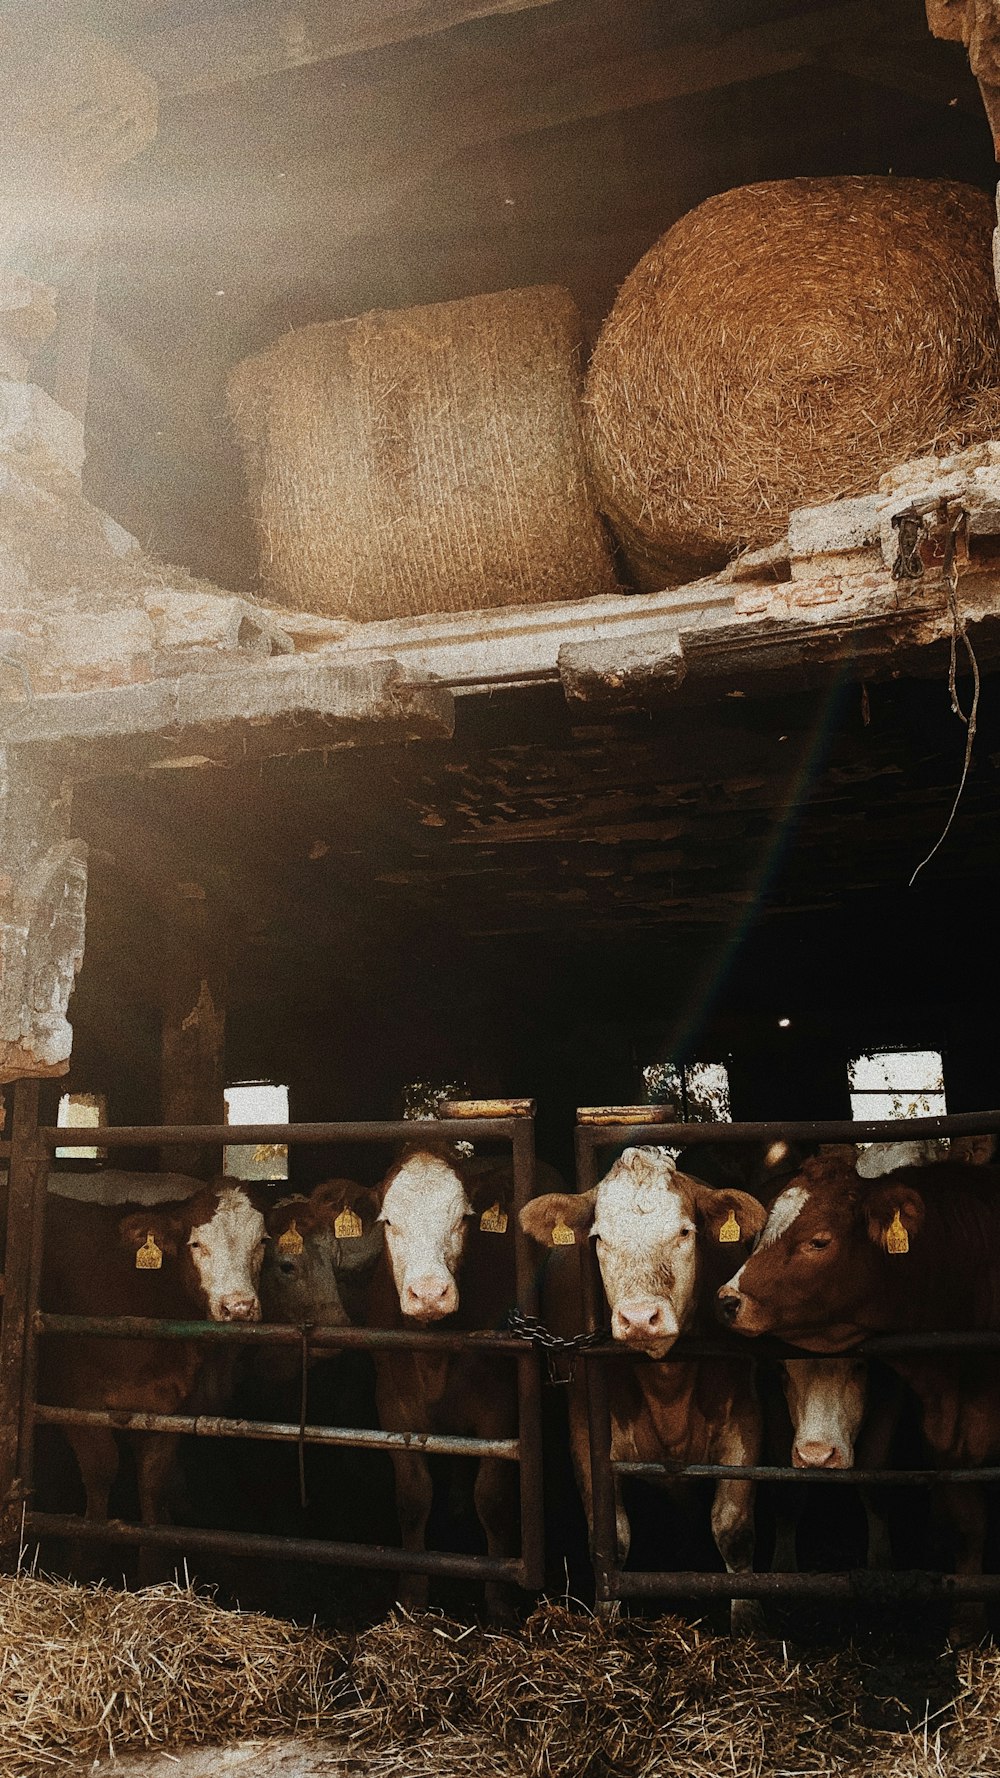 a group of cows standing inside of a barn